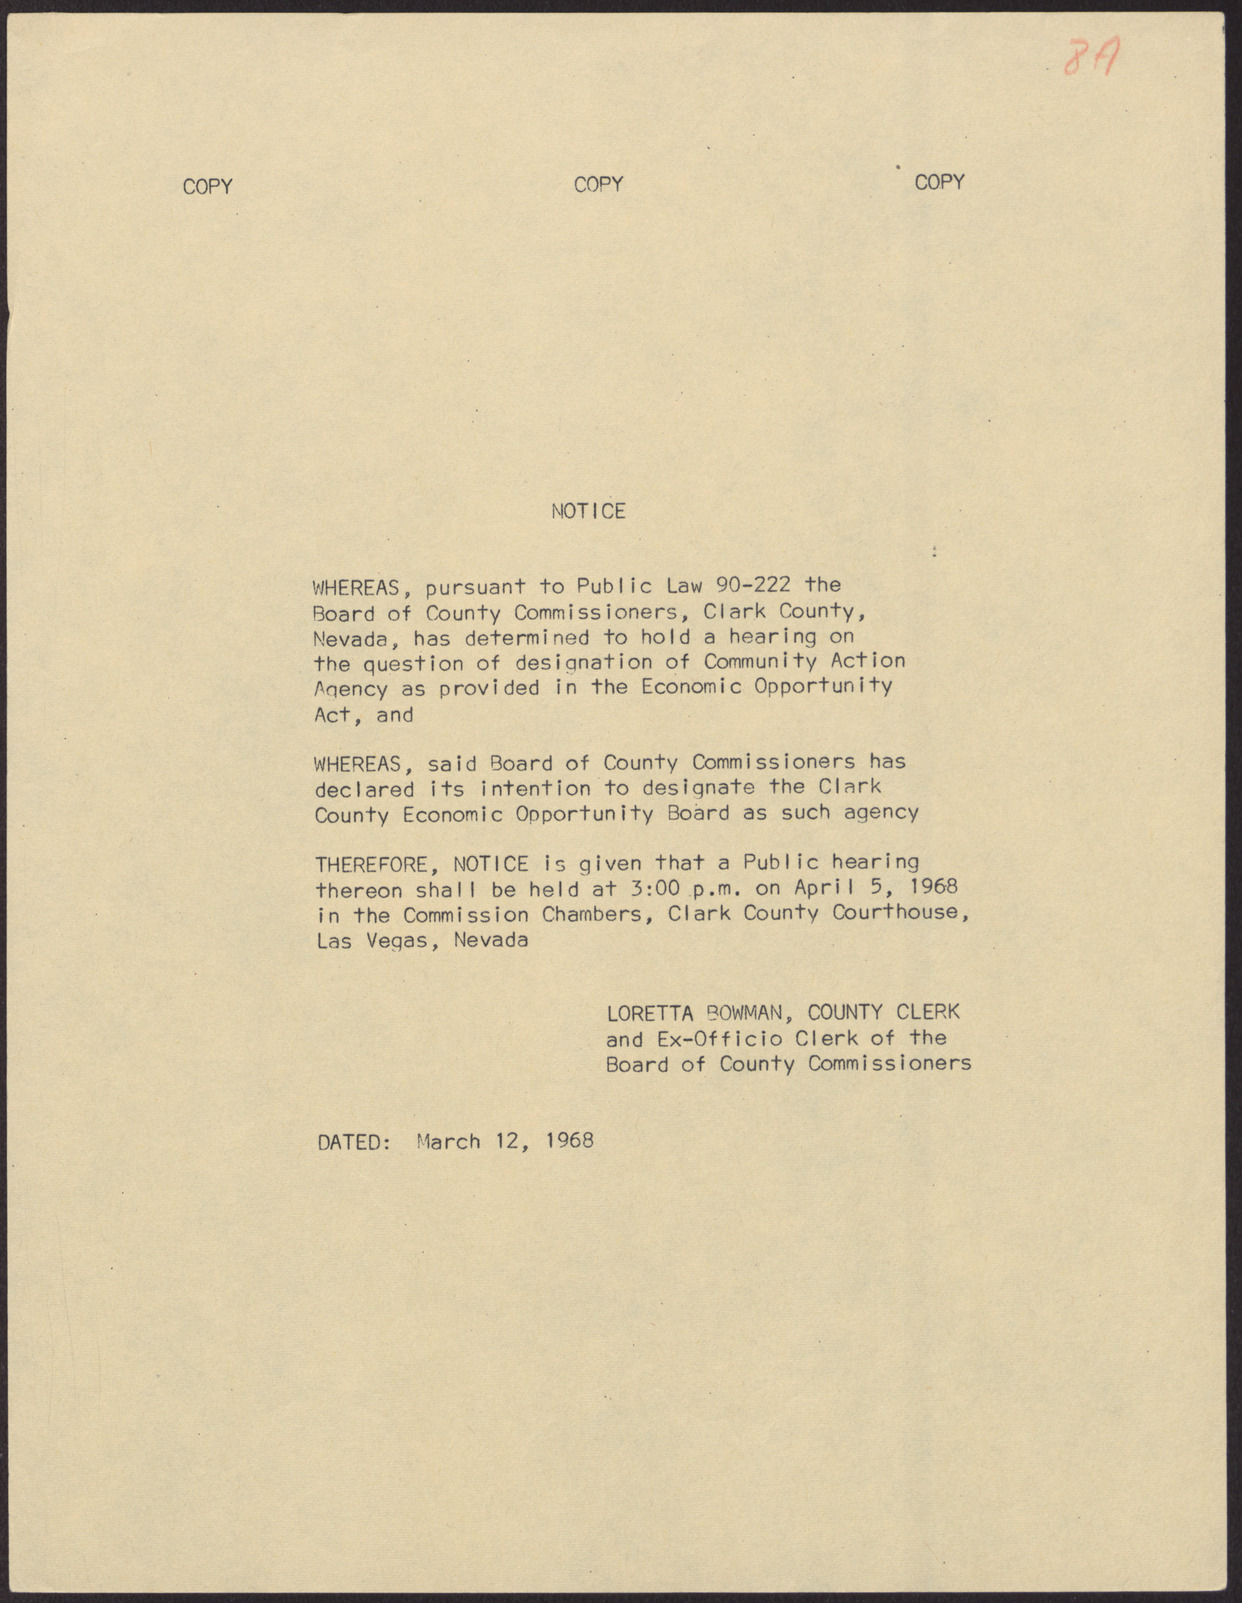 Notice from the Board of County Commissioners, March 12, 1968